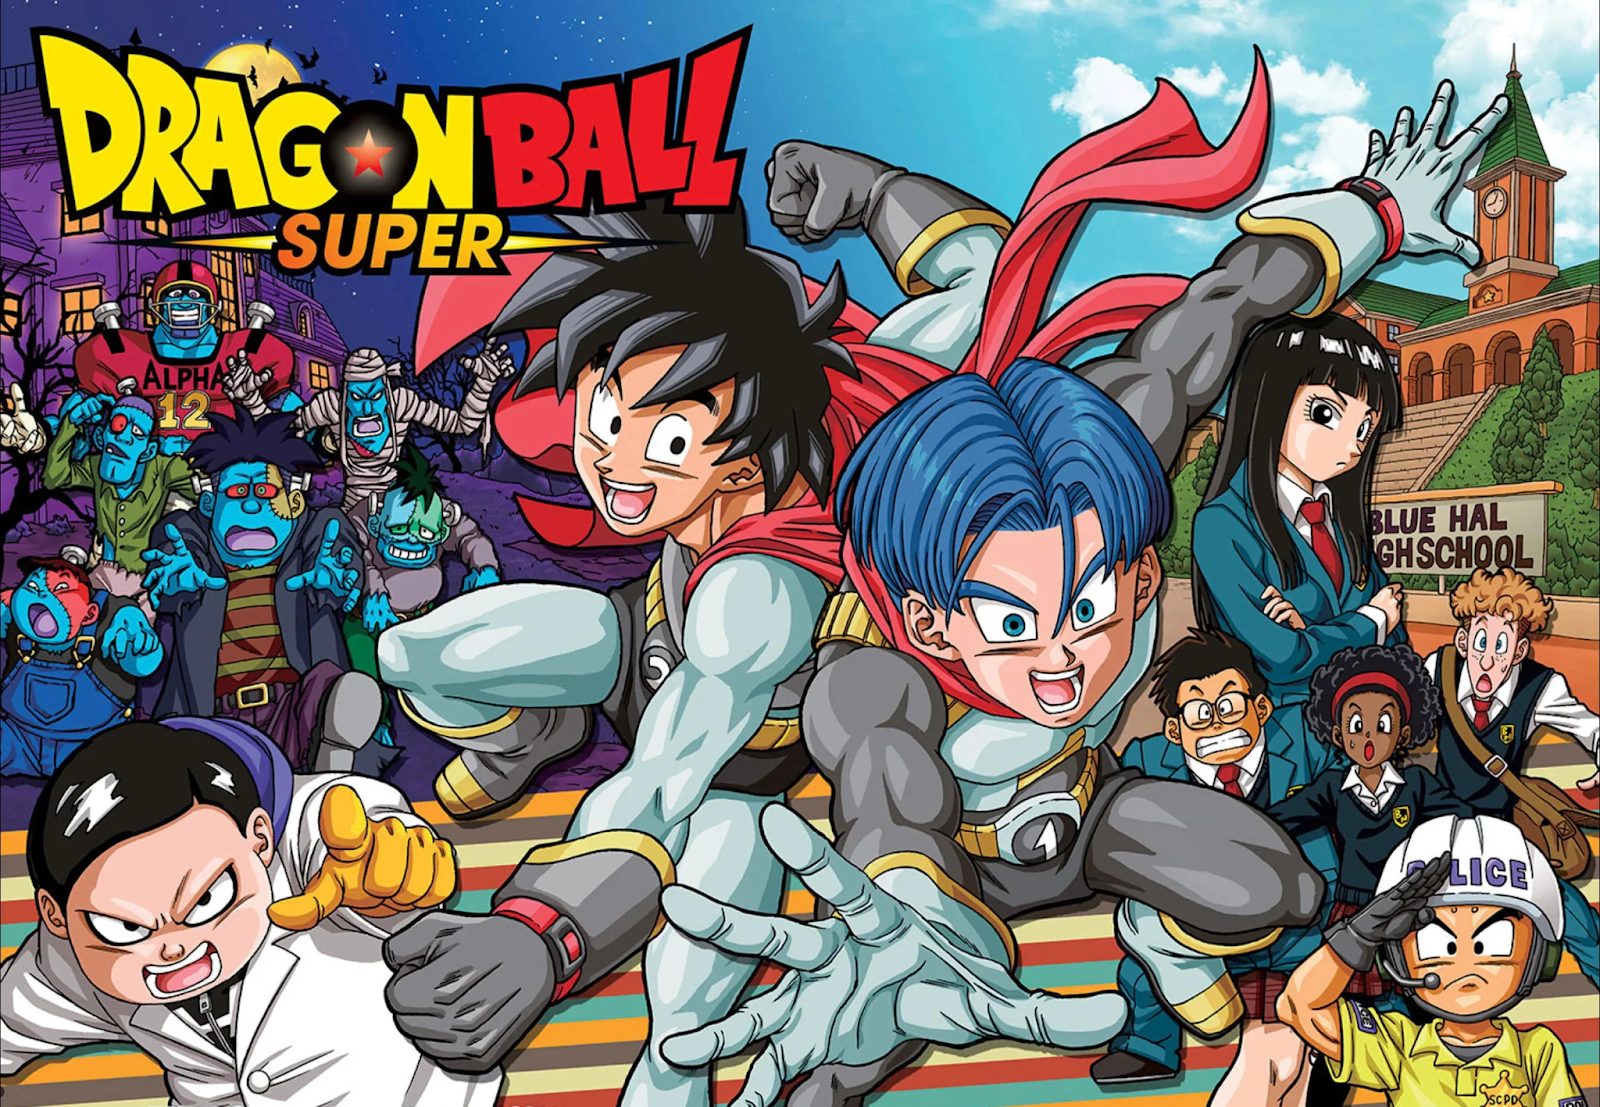 Where Should Dragon Ball Super Go Now After Super Hero?